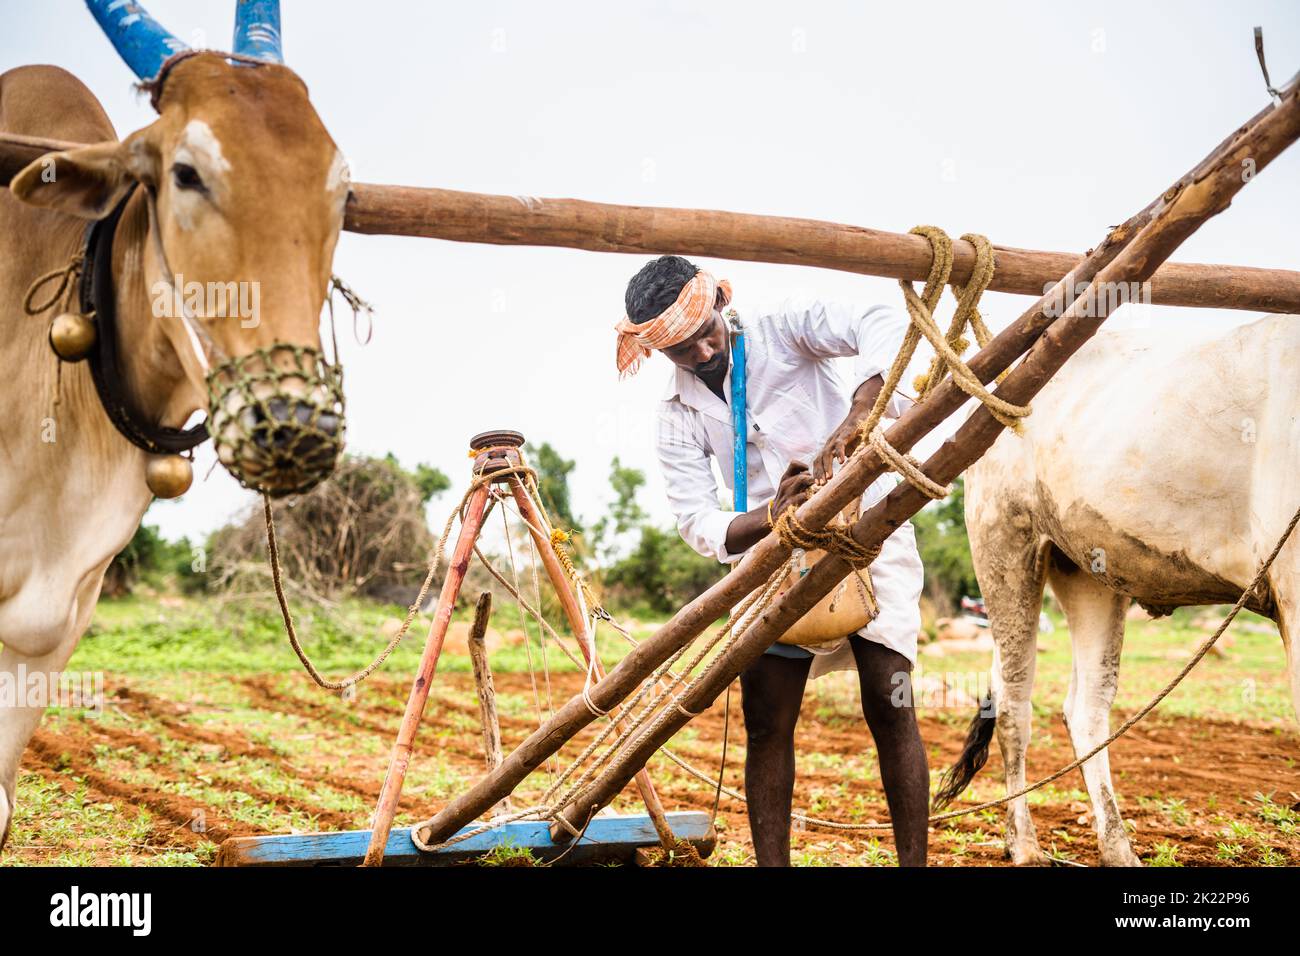 Farmer tightening rope of plough while preparing for work at farmland using oxen - concept of traditional form of agriculture, rural india and village Stock Photo